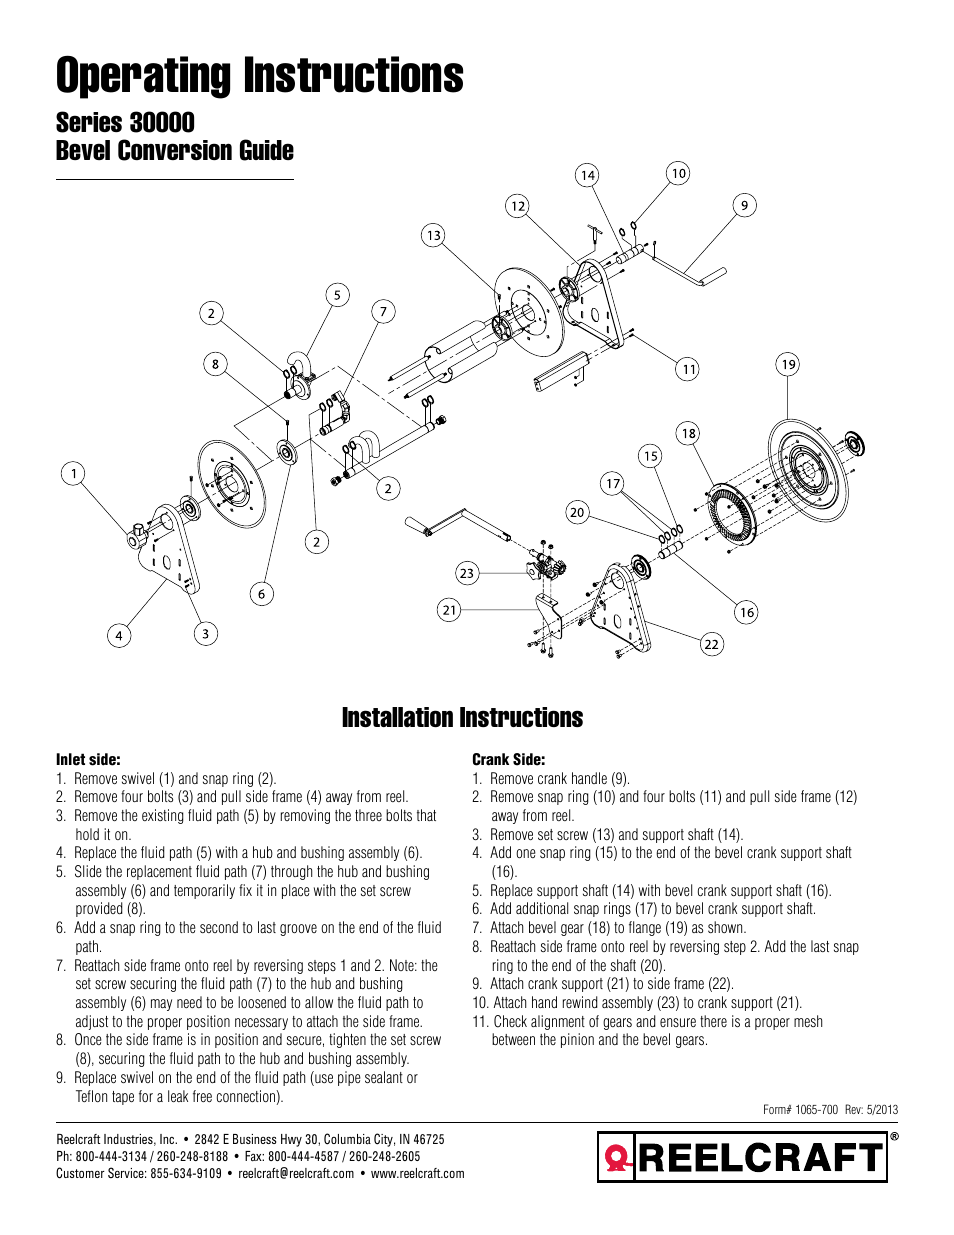 Series 30000 Bevel Conversion Guide